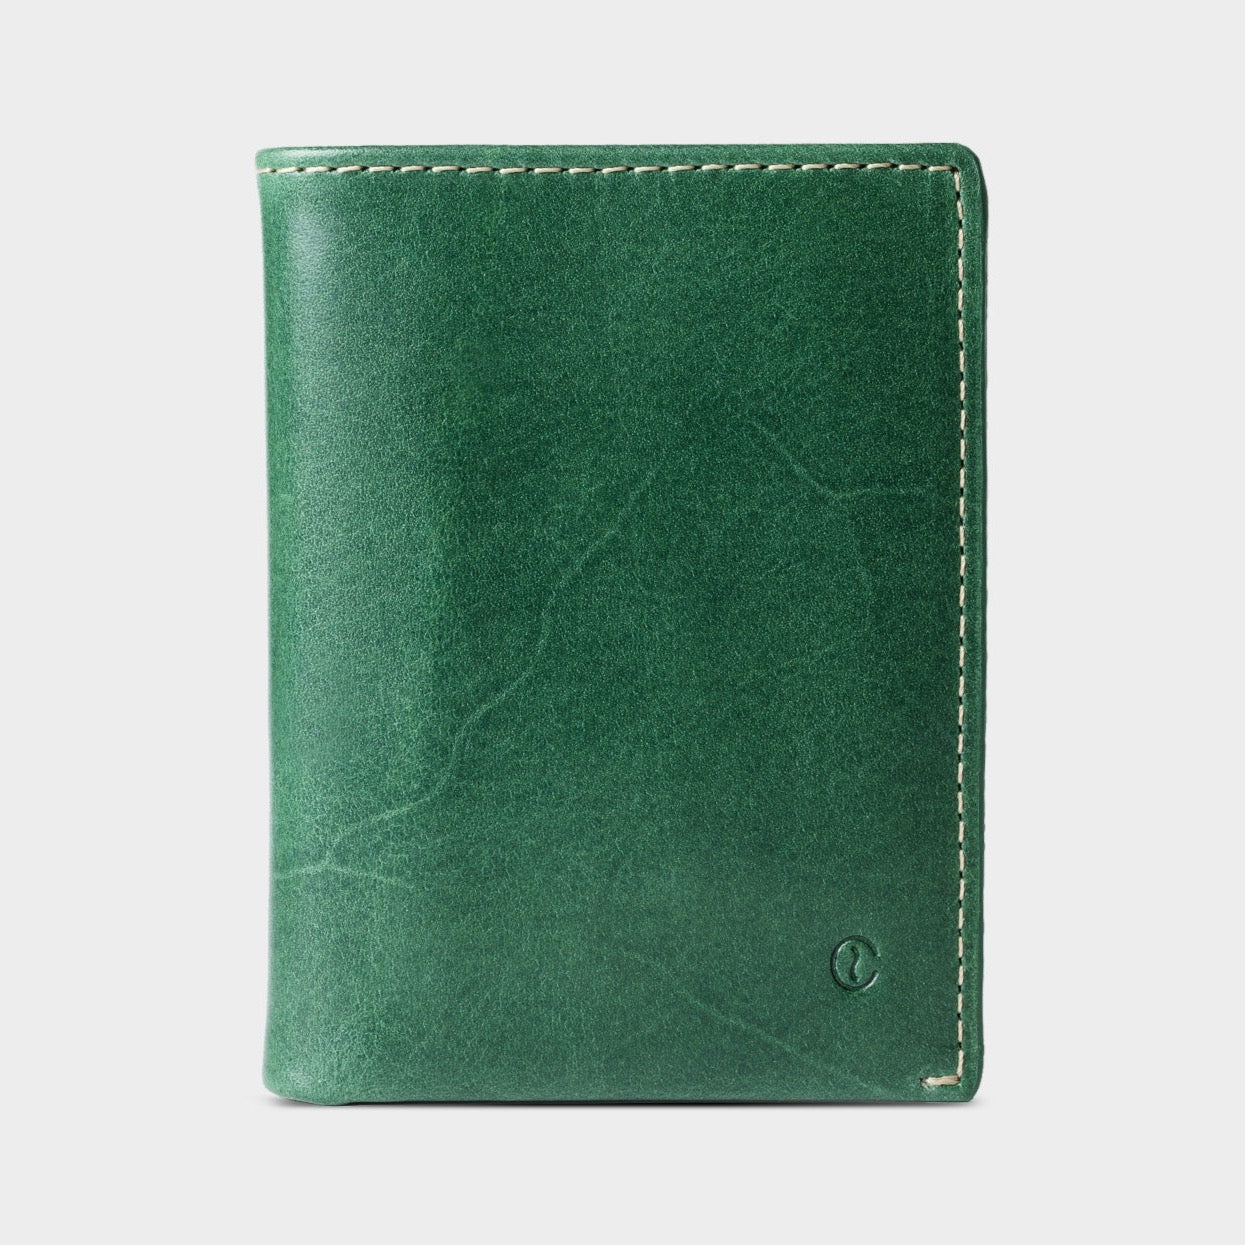 Slim Leather Wallet Costa Rica - Green